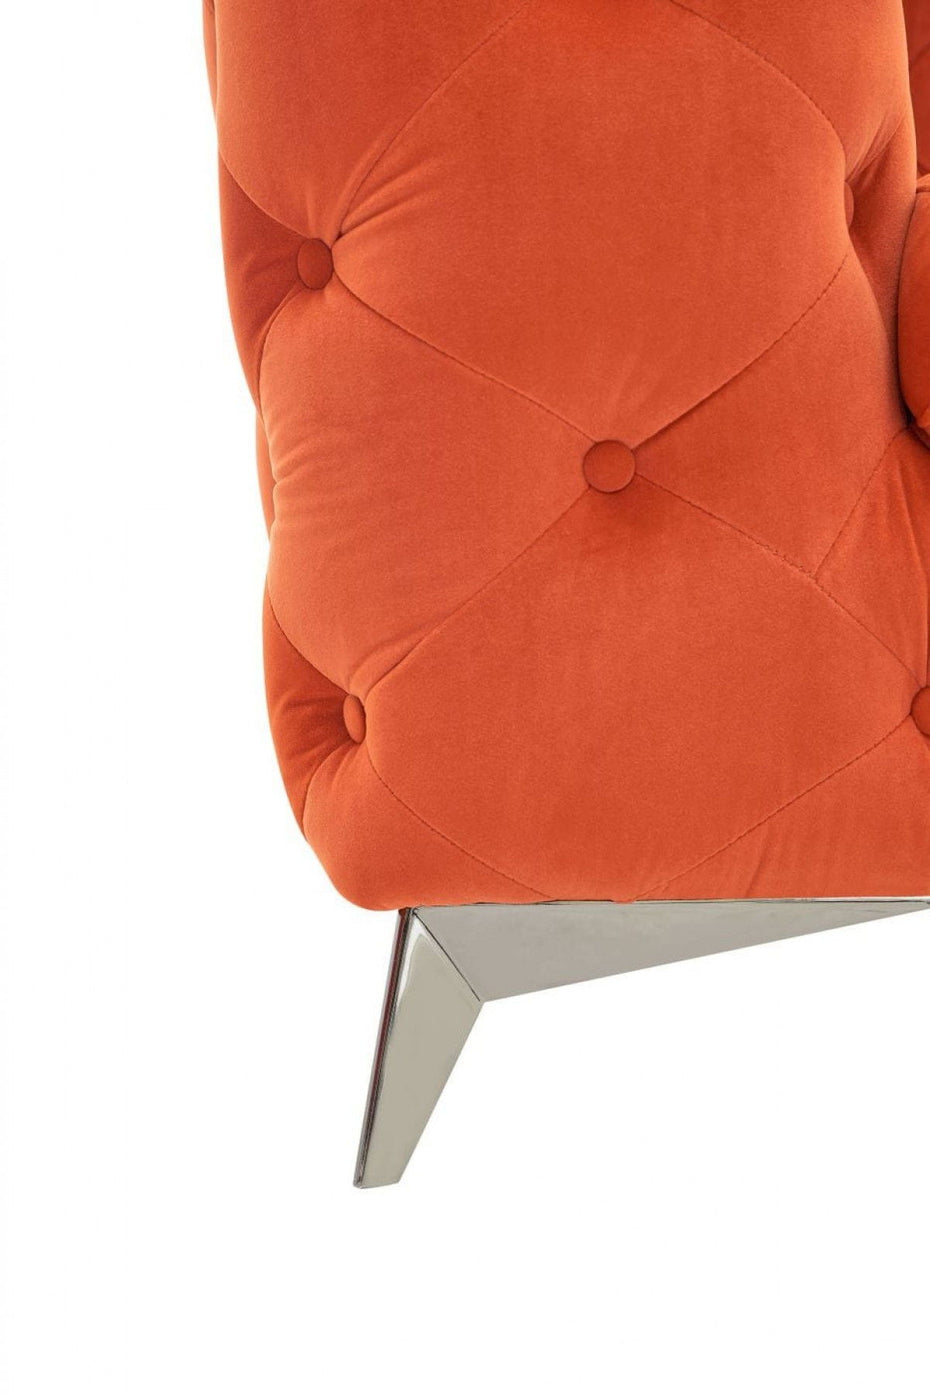 Velvet And Silver Solid Color Chesterfield Chair 50" - Orange